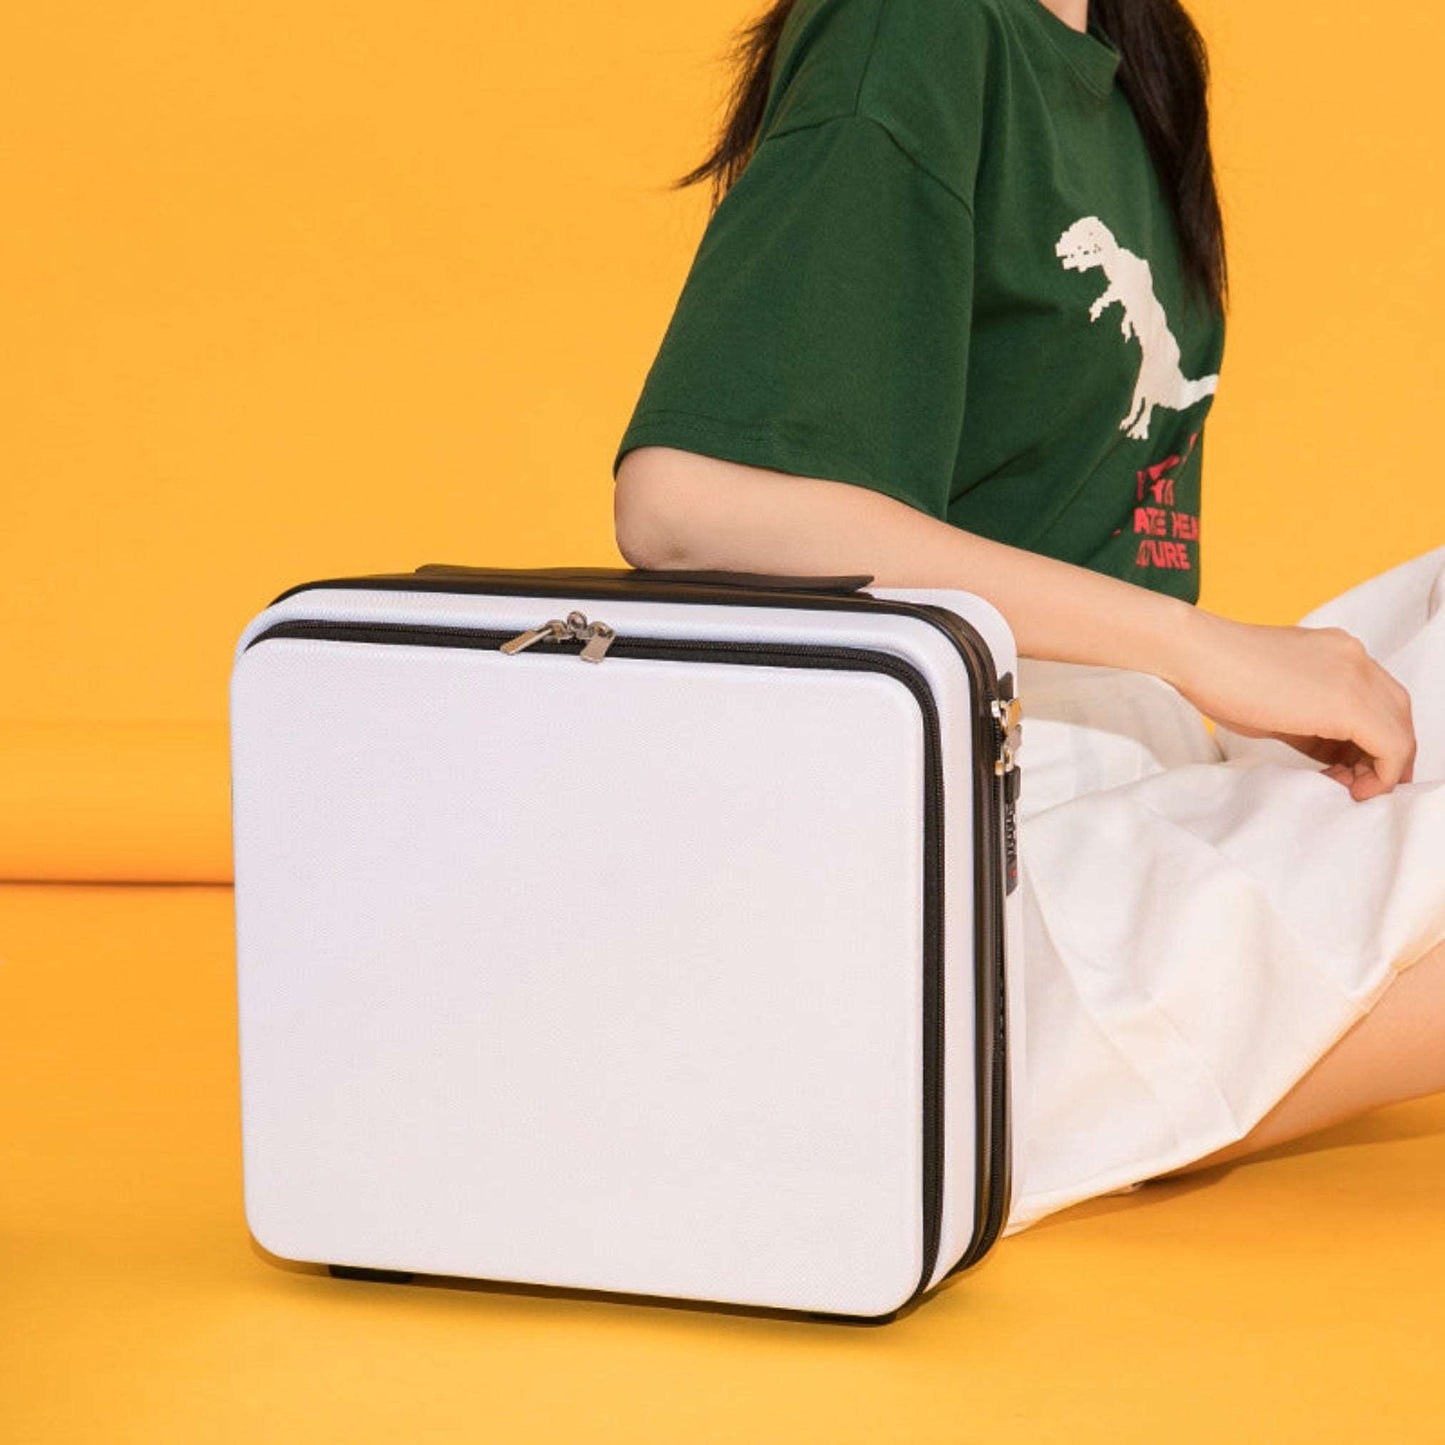 Mini Suitcase-backpacks-Travel in style with our Mini Suitcase. Compact, functional, and fashionable - your perfect travel companion! -okidokibro